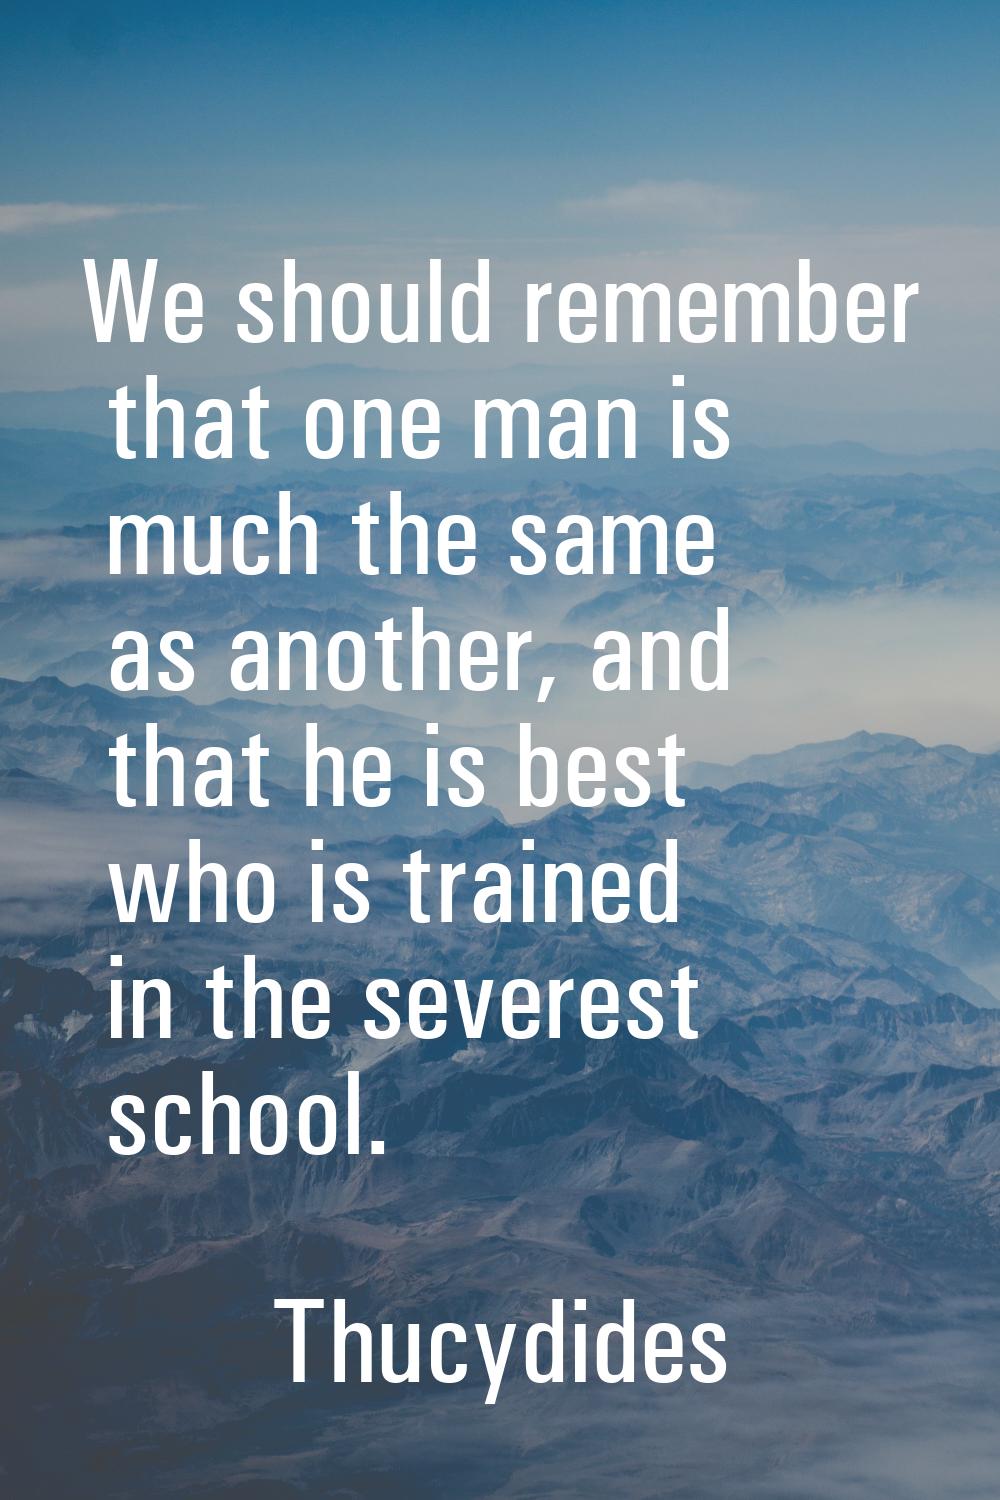 We should remember that one man is much the same as another, and that he is best who is trained in 